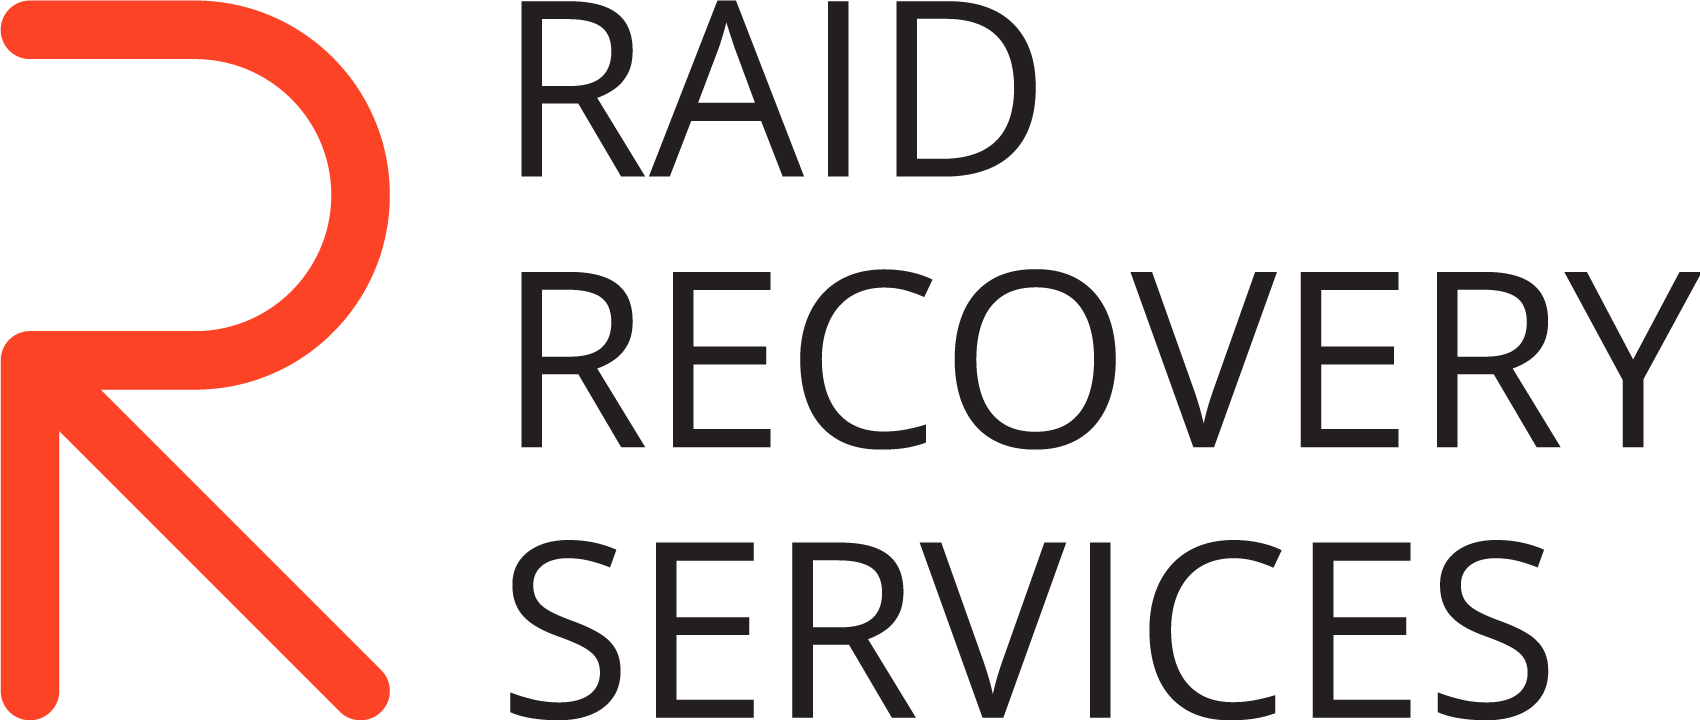 RAID Recovery Services